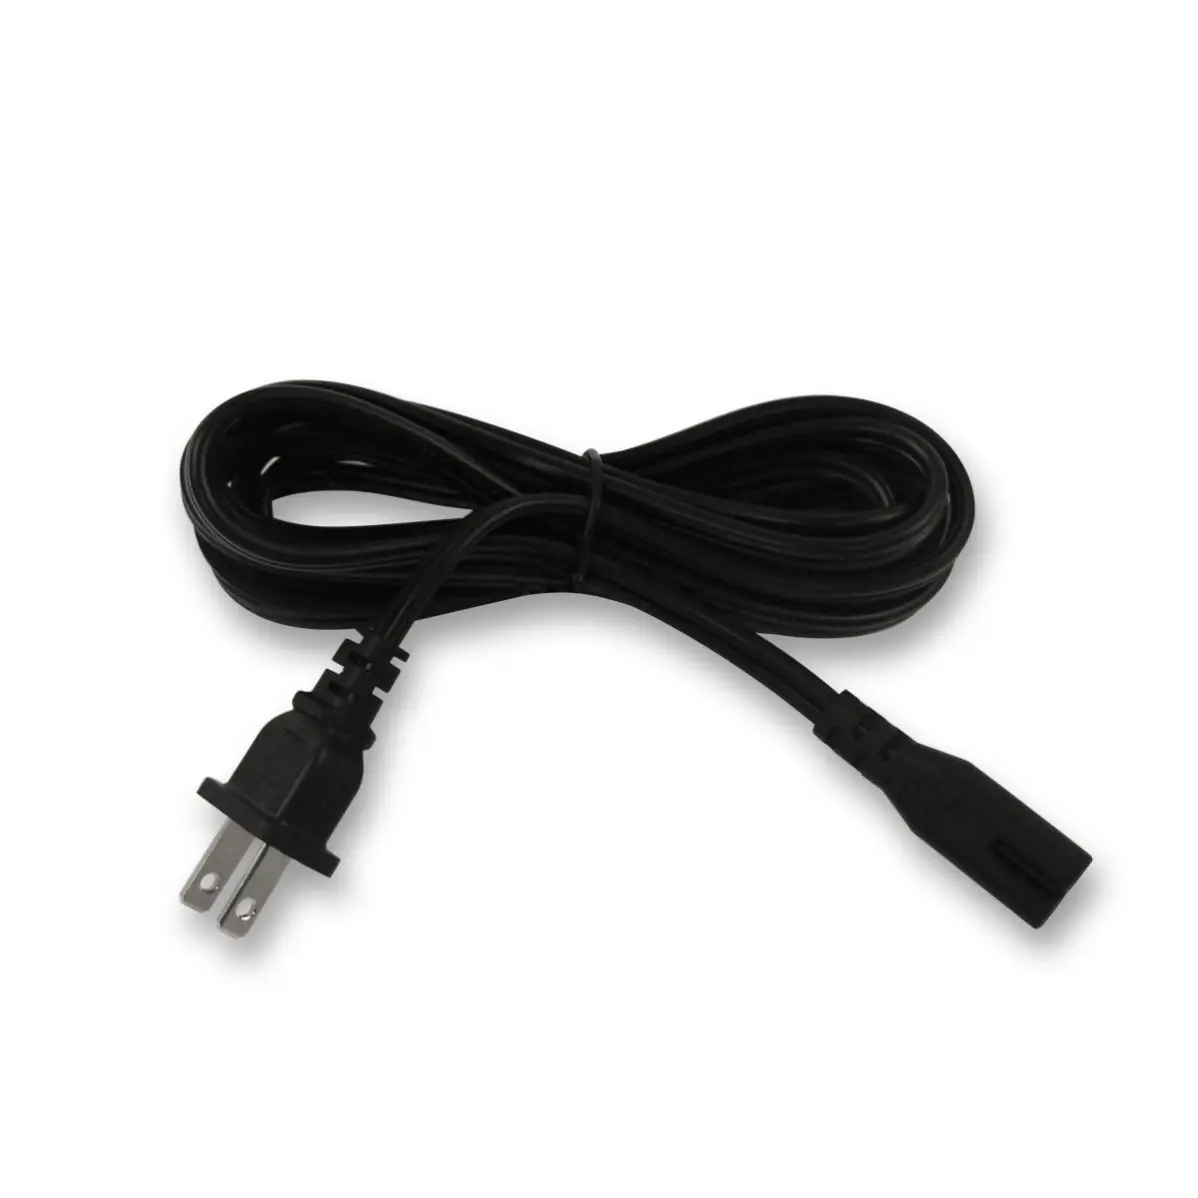 Drama Adverteerder Boodschapper Black 6 Feet 1.82 Meters American Plug Ac Us Polarized Polarity 2pin Cable  C7 Iec Connector 2 Pin Usa Power Cord - Buy Iec320 C7 To Nema 1-15p,Iec320  Figure 8 Connector End